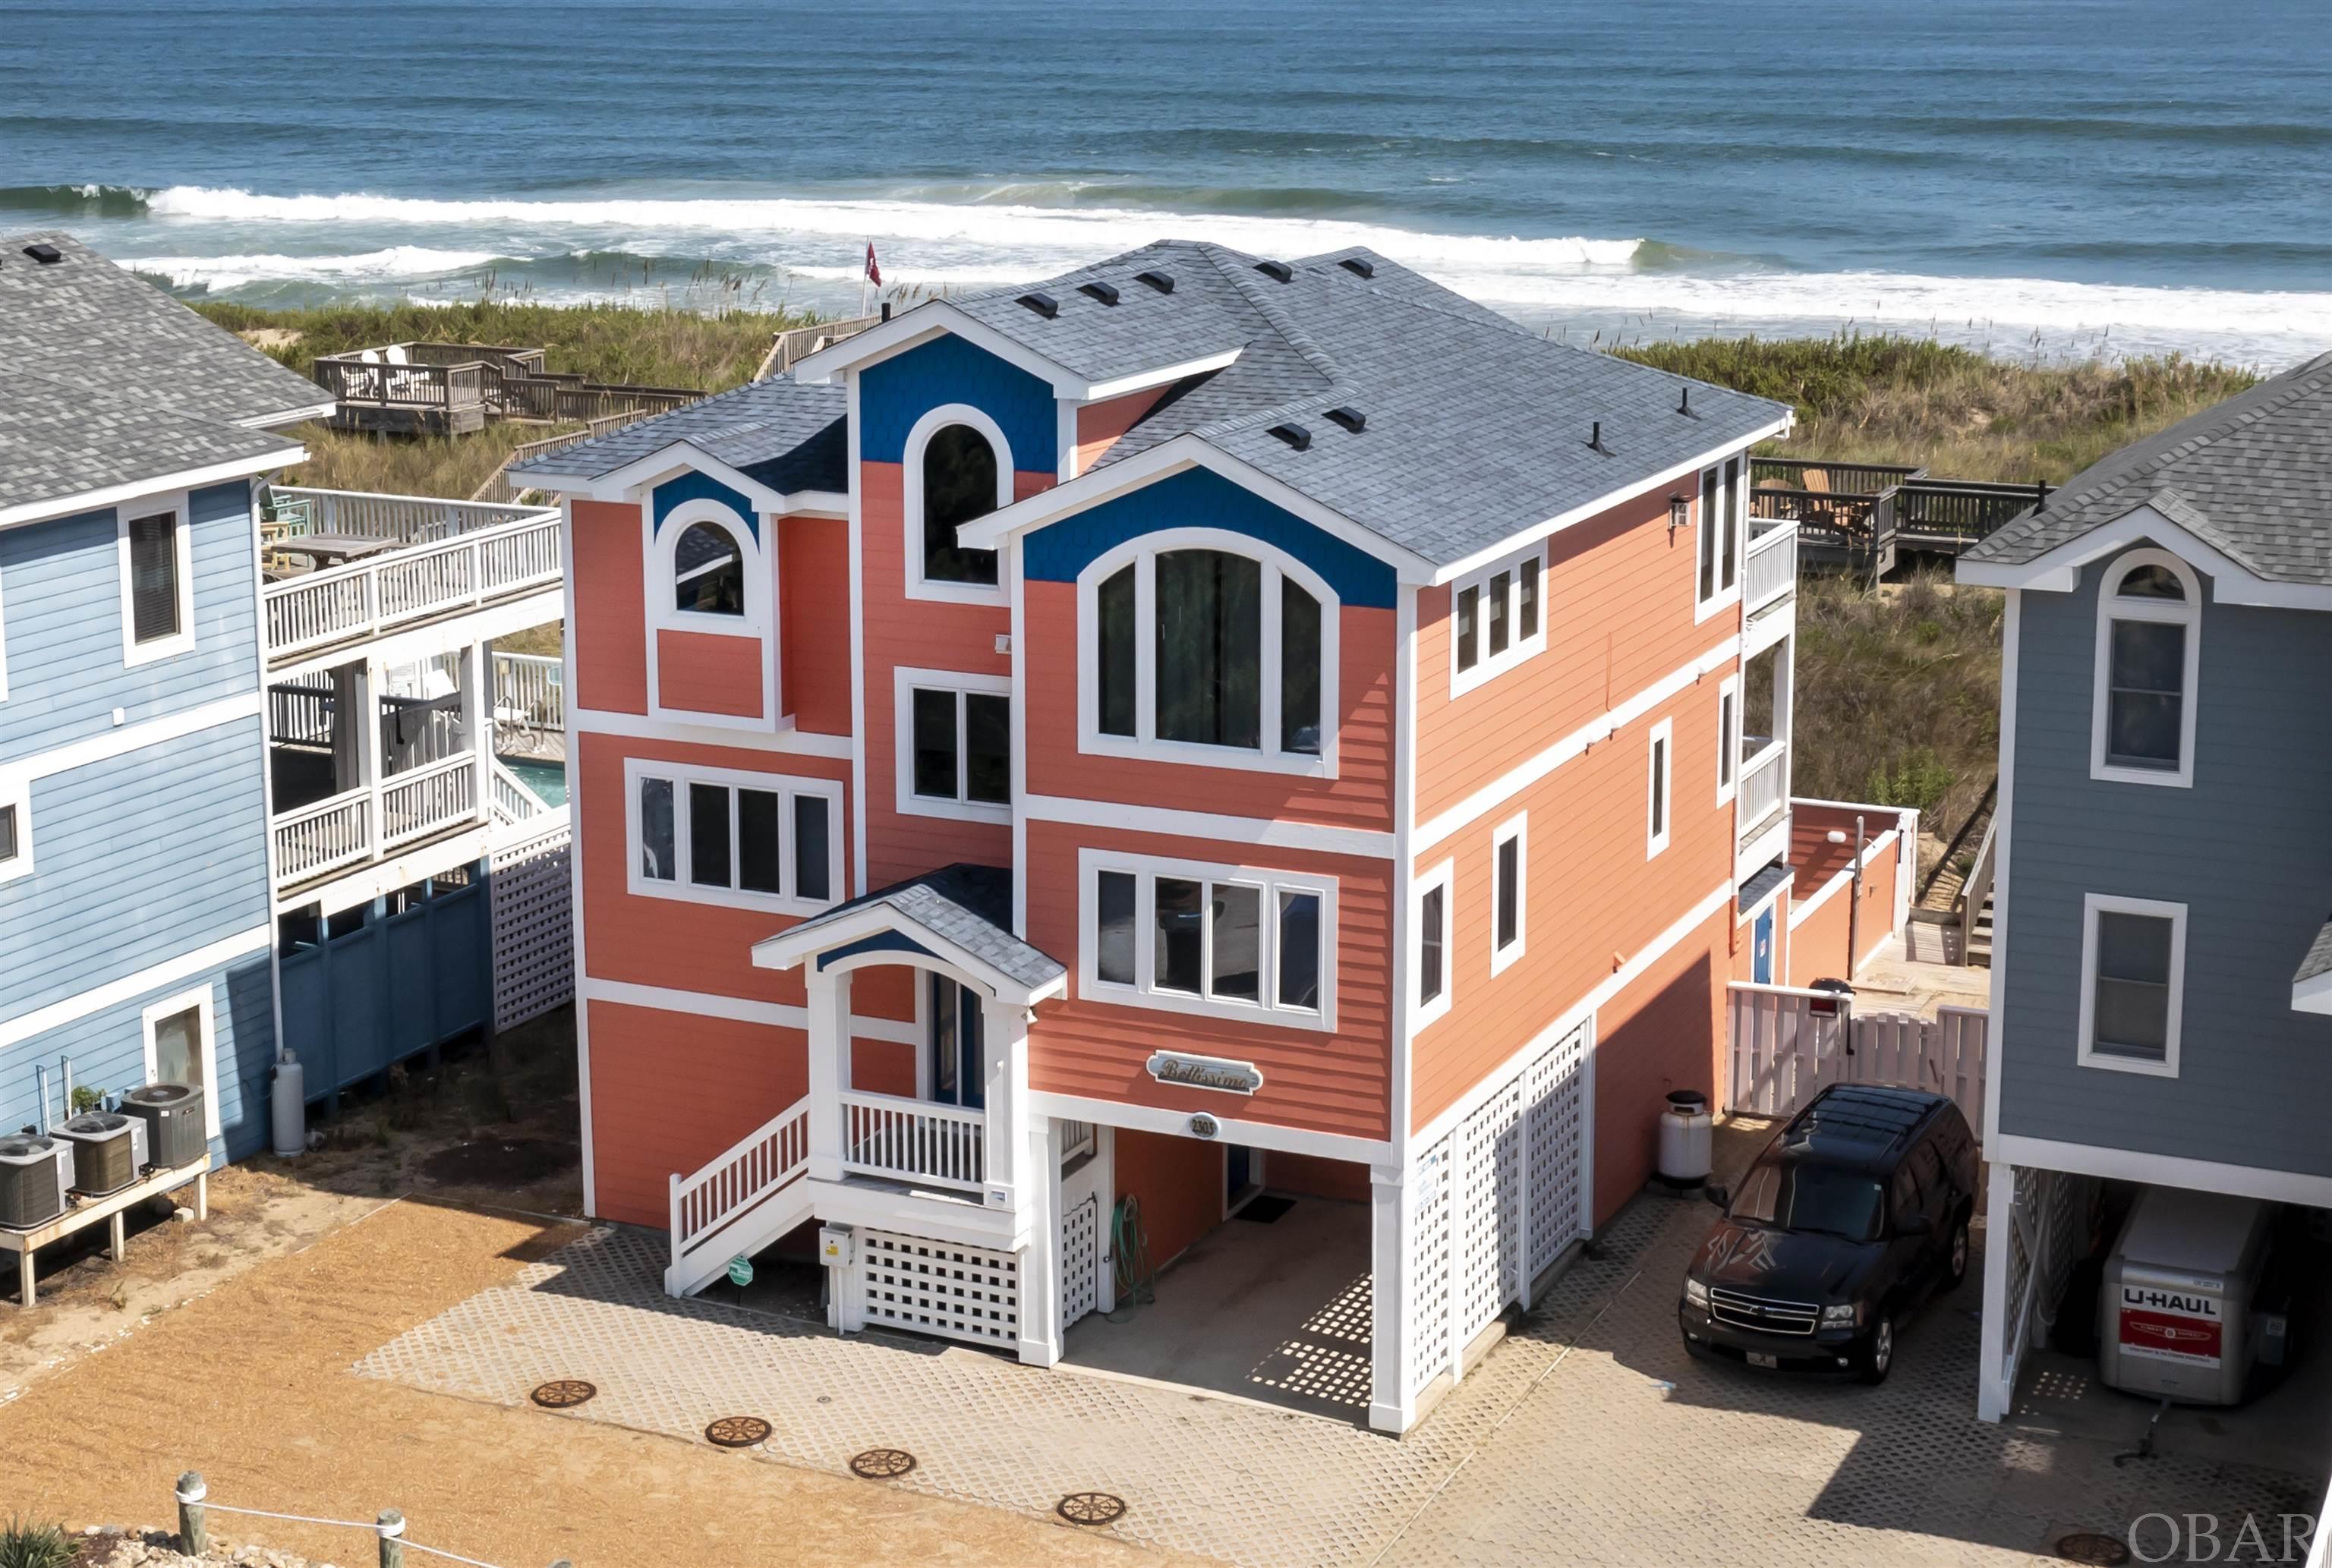 Rare opportunity to own an oceanfront home in an "X" flood zone (no flood insurance required) and in a unique area having a healthy, protective beach that currently does not require beach nourishment or taxed with the special assessments that fund nourishment projects. In addition, it's located on a quiet cul-de-sac offering privacy from the beach road traffic. This 5 Bedroom house offers a reverse floor plan maximizing on the unobstructed panoramic views of the Atlantic Ocean. Your guests will love having their own private bath in any of the 4 en suites. The ground level has a living area with kitchenette and full size refrigerator, full bath and bedroom with 2 sets of bunk beds and en suite. The mid -level has a den/media area, laundry and 3 en suites. The third level has vaulted ceilings, an open living area with kitchen, dining and a separate room for reading, relaxing or a fun game of footsball. It's spacious enough to accommodate large or small groups. You and your guests will appreciate the elevator for handling luggage and getting your groceries to the 3rd floor kitchen. If you enjoy cooking and dining at home, the double dishwashers will make clean up a breeze. Speaking of breeze, there is no shortage of deck space for outside entertaining and enjoying the cool ocean breeze on hot summer nights or soaking up the sun in the private pool or the upper dune deck. Easy access to the beach with a shared boardwalk with the neighbor. Perfect for 2nd home or rental investment. This vacation home has a solid rental history with repeat guests. Within walking distance to many popular restaurants, shops, ice-cream and the Gallery Row art district. This is a one of a kind property because of its unique location and "X" flood zone. Call today for a private tour.